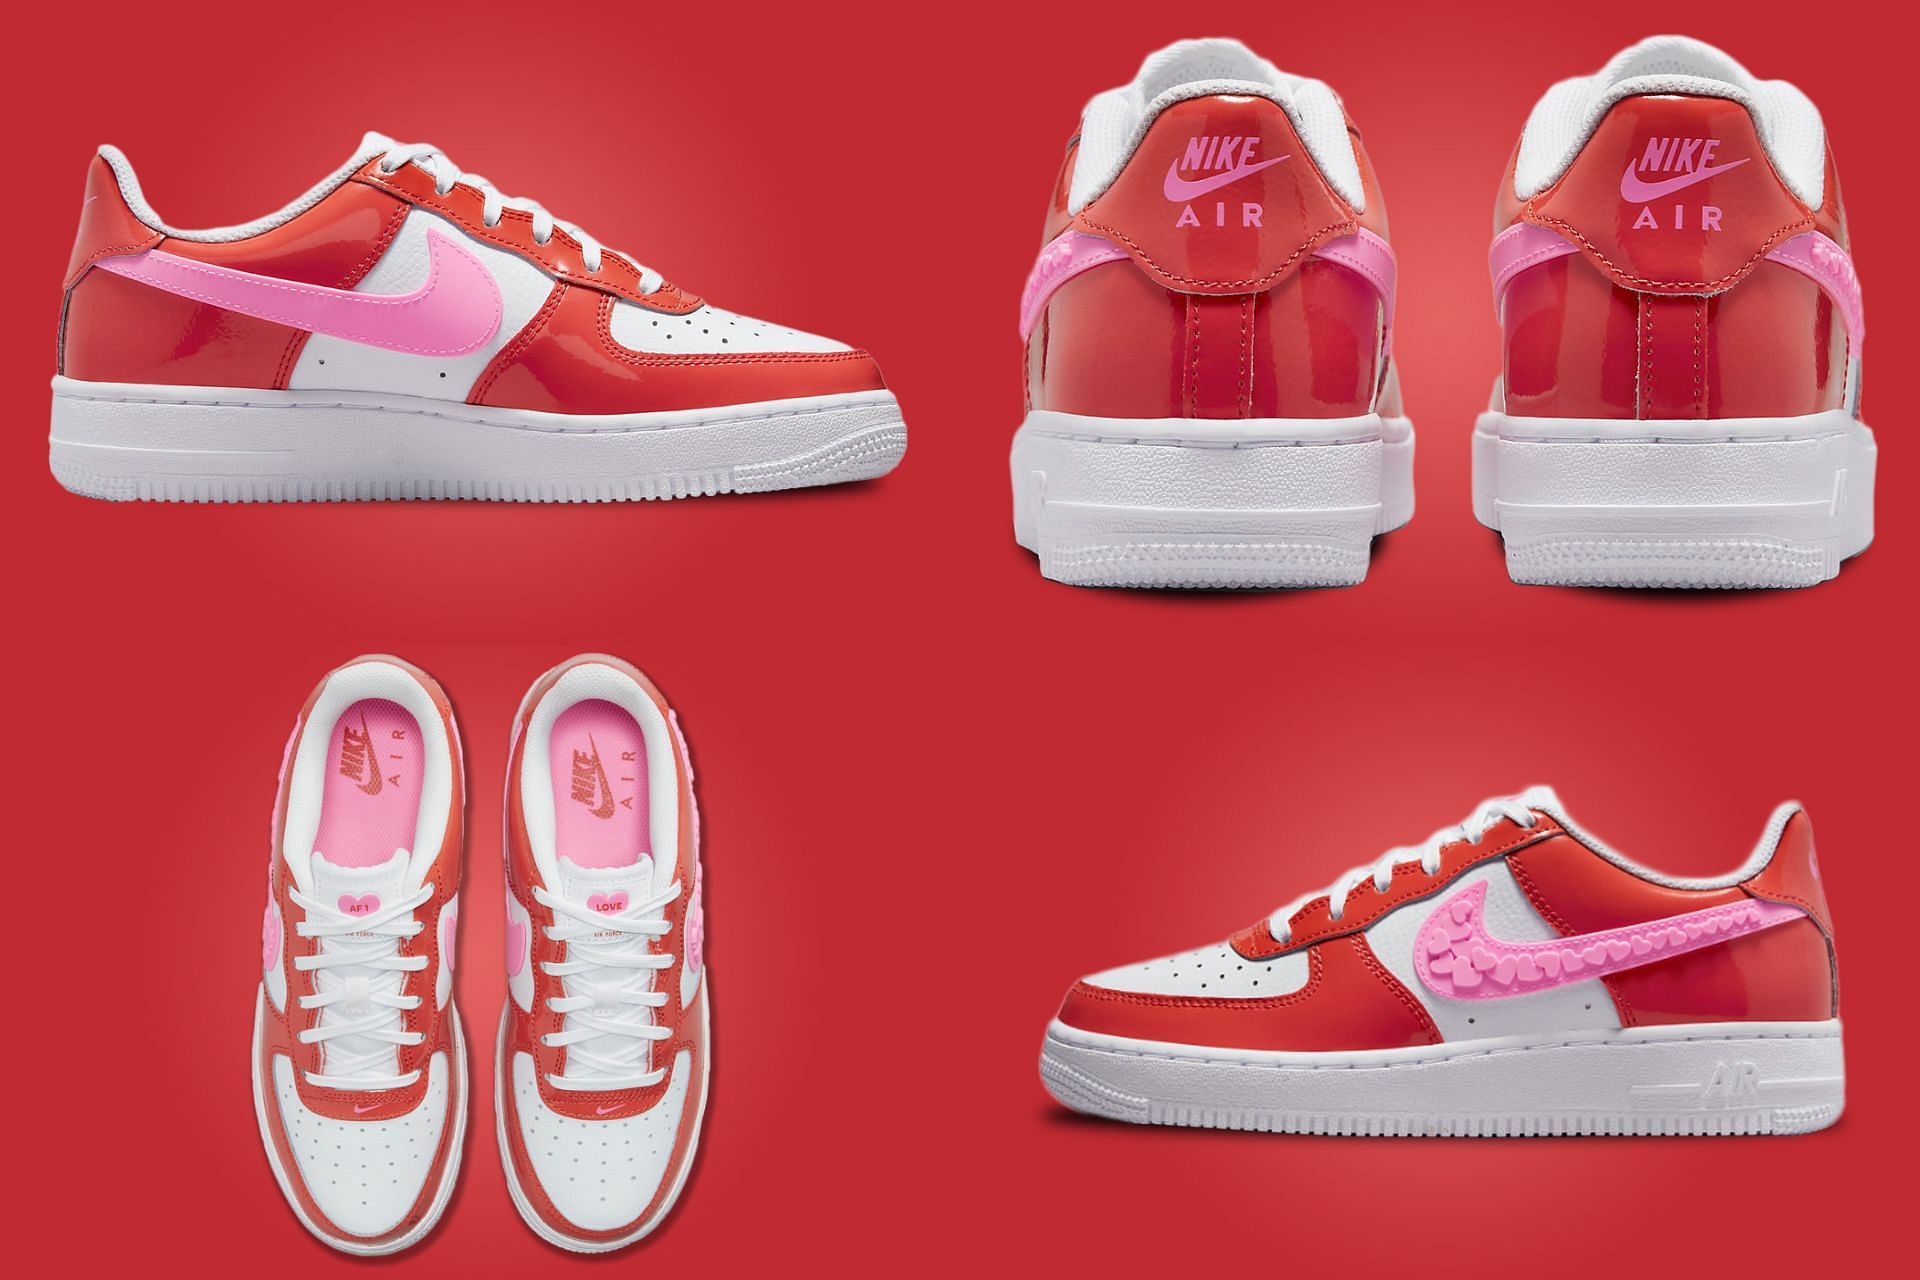 The upcoming 2023 Nike Air Force 1 &ldquo;Valentine&rsquo;s Day&rdquo; is set to release ahead of the global love festival in shades of pink and red (Image via Sportskeeda)